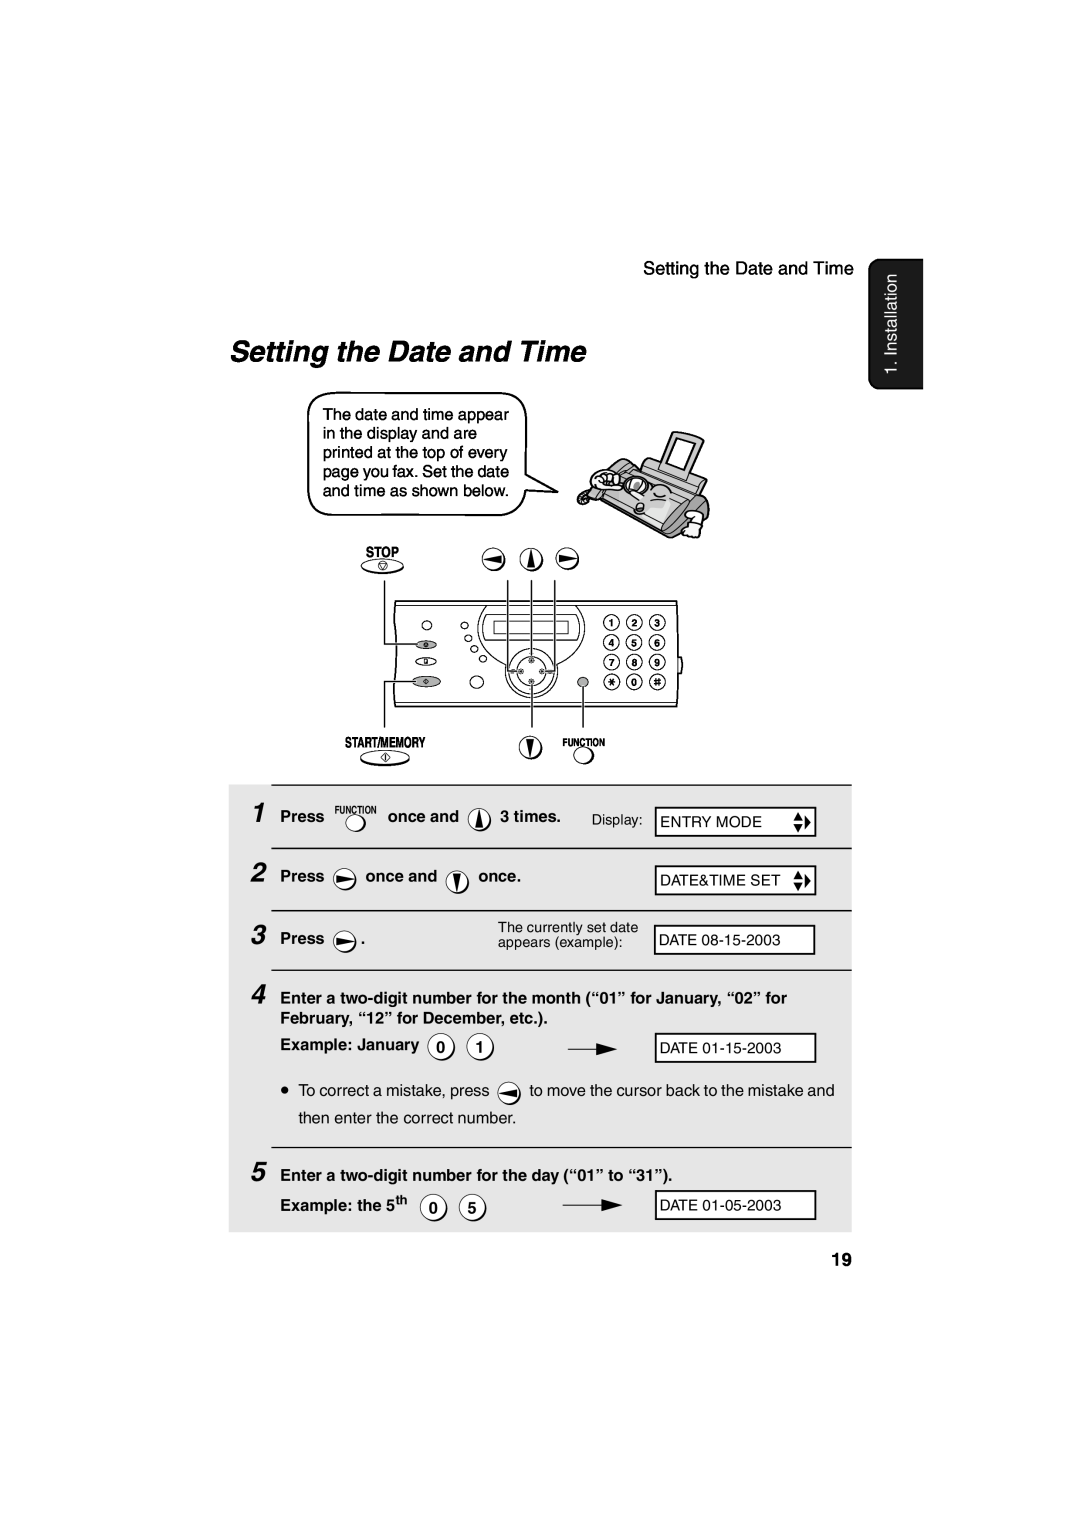 Sharp UX-A260 manual Setting the Date and Time, Installation1 